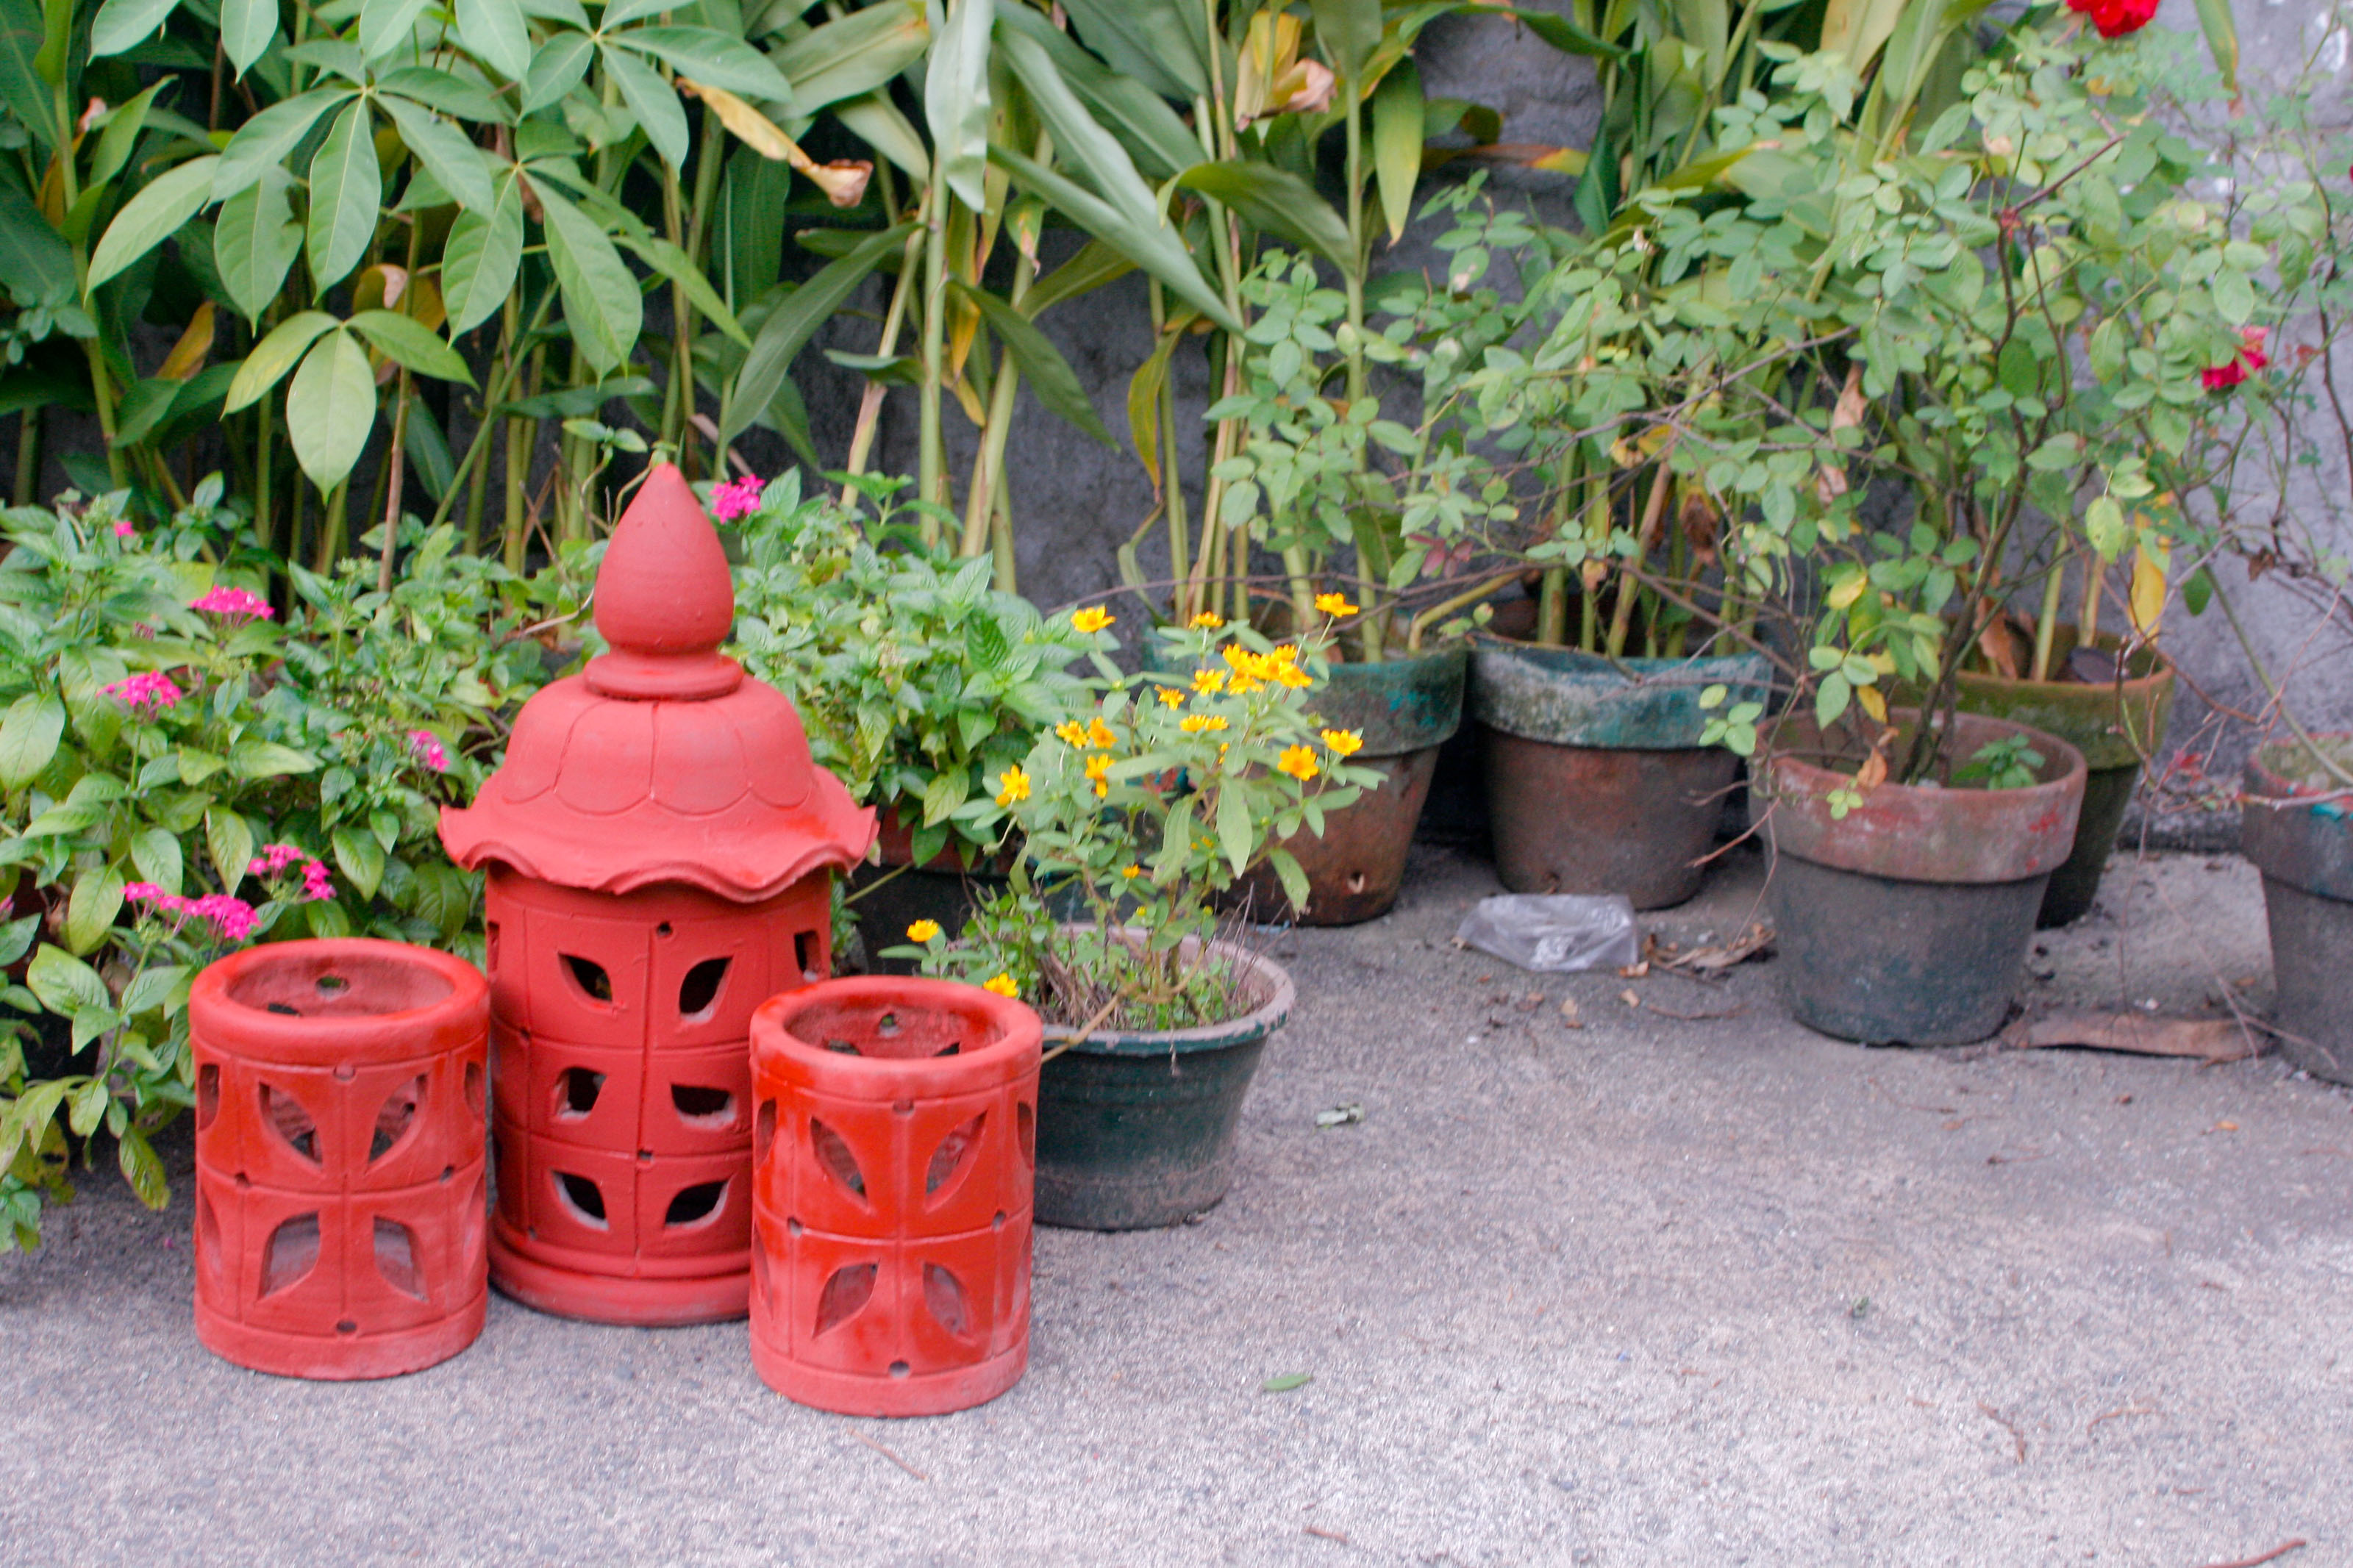 How to Paint Concrete Garden Ornaments: 8 Steps (with Pictures)